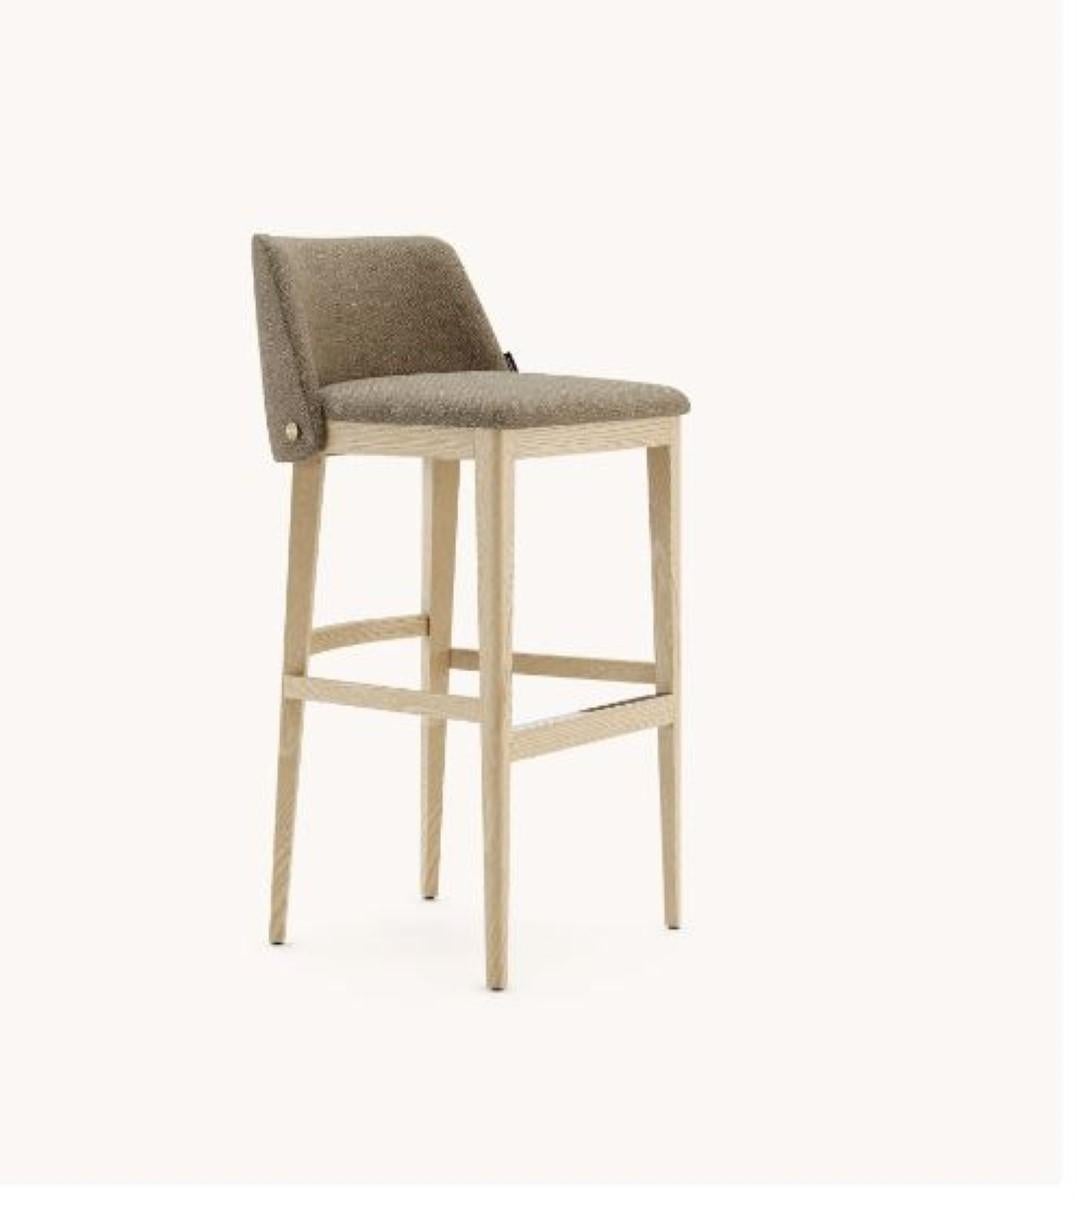 Louise Bar Chair by Domkapa
Materials: Fiber, Natural Ash, Steel. 
Dimensions: W 51 x D 50 x H 98 cm. 
Also available in different materials. Please contact us.

Designed to make a statement, Camille bar and counter chairs are the perfect